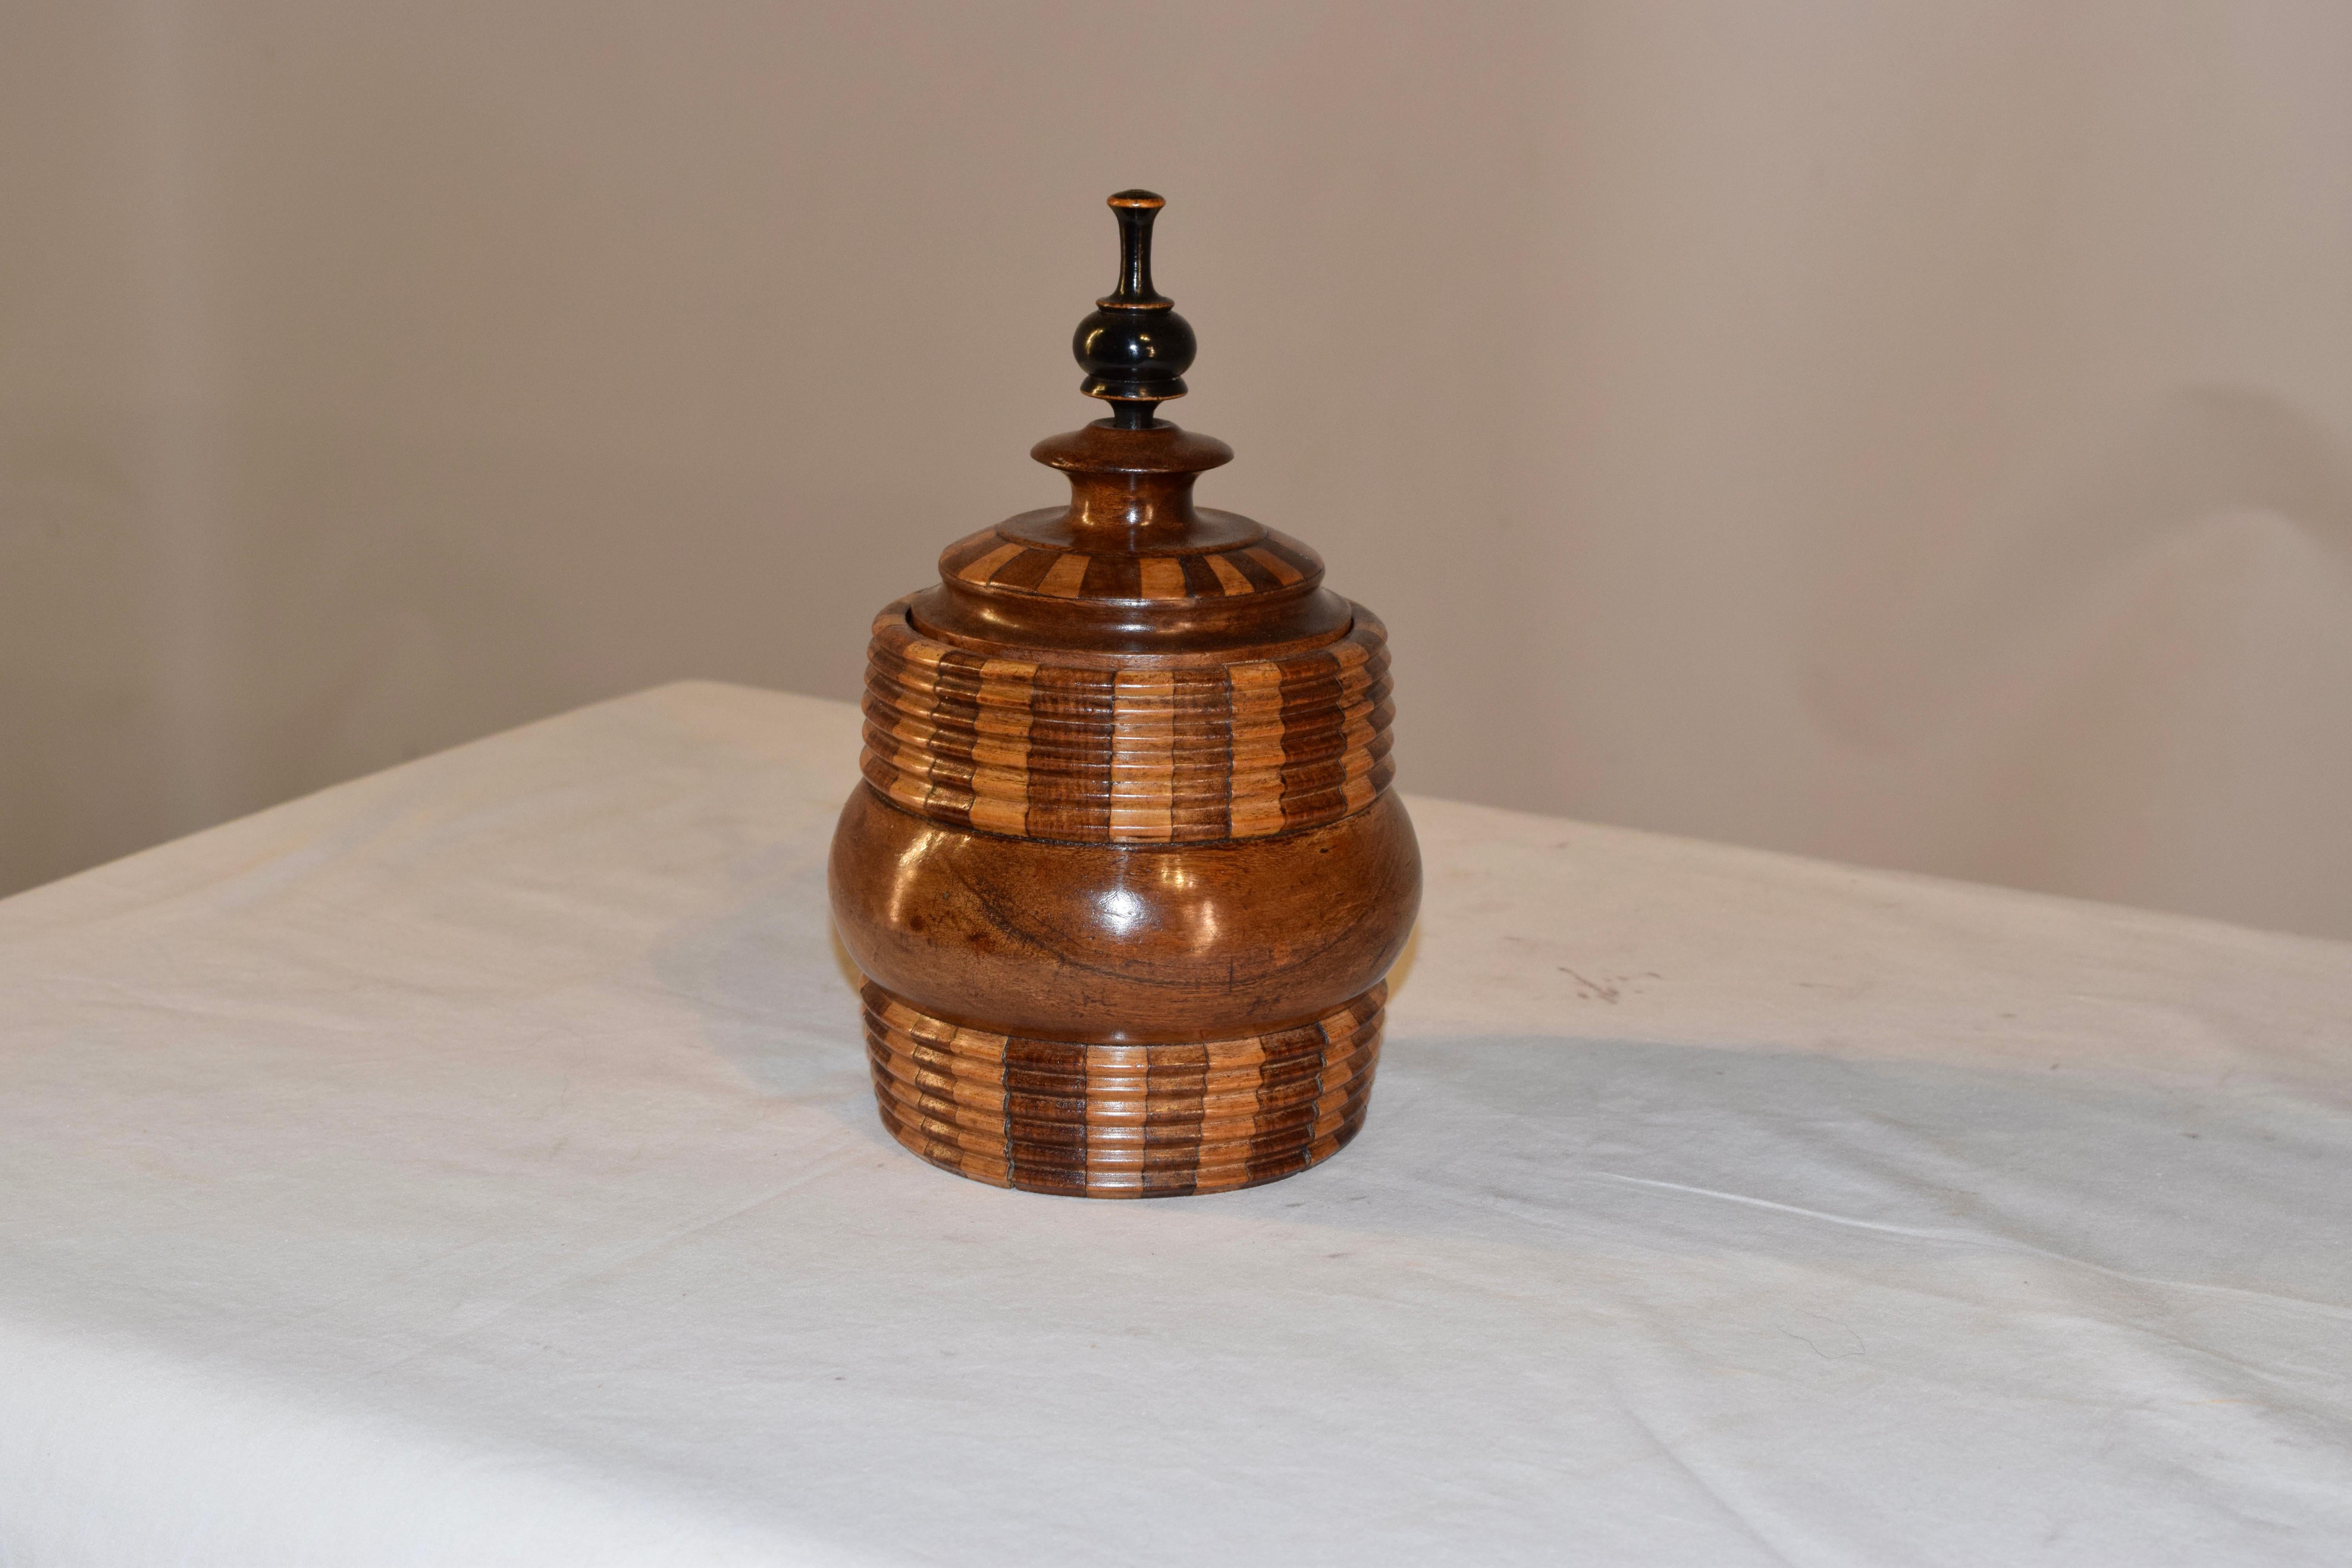 19th century lidded treen jar from Europe made from oak and fruitwood. The top has a hand-turned finial atop a lovely hand-turned shaped jar made from two different woods for a lovely color contrast. There are hand turned reeded collars on the top